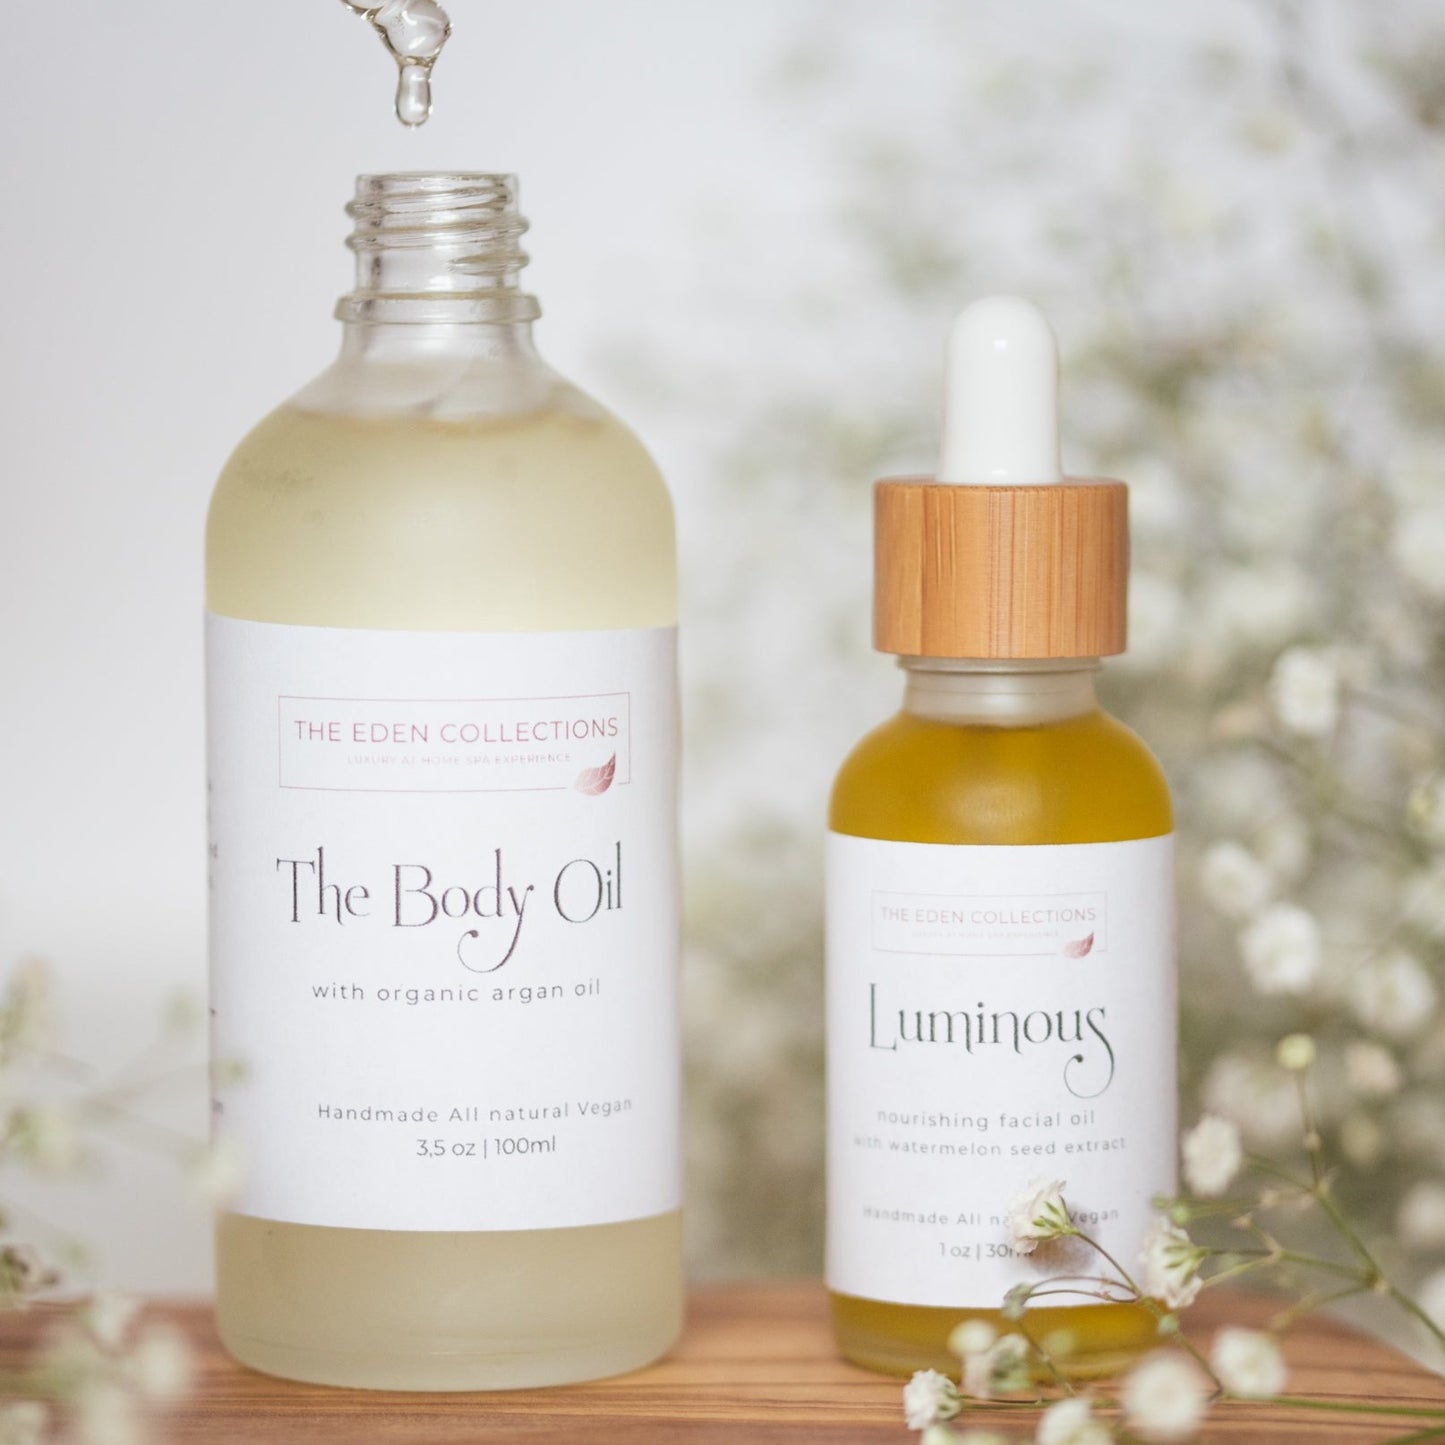 Luminous Facial oil with watermelon seed oil and all natural ingredients. Facial, bath and body oils are available to buy form The Eden Collections.